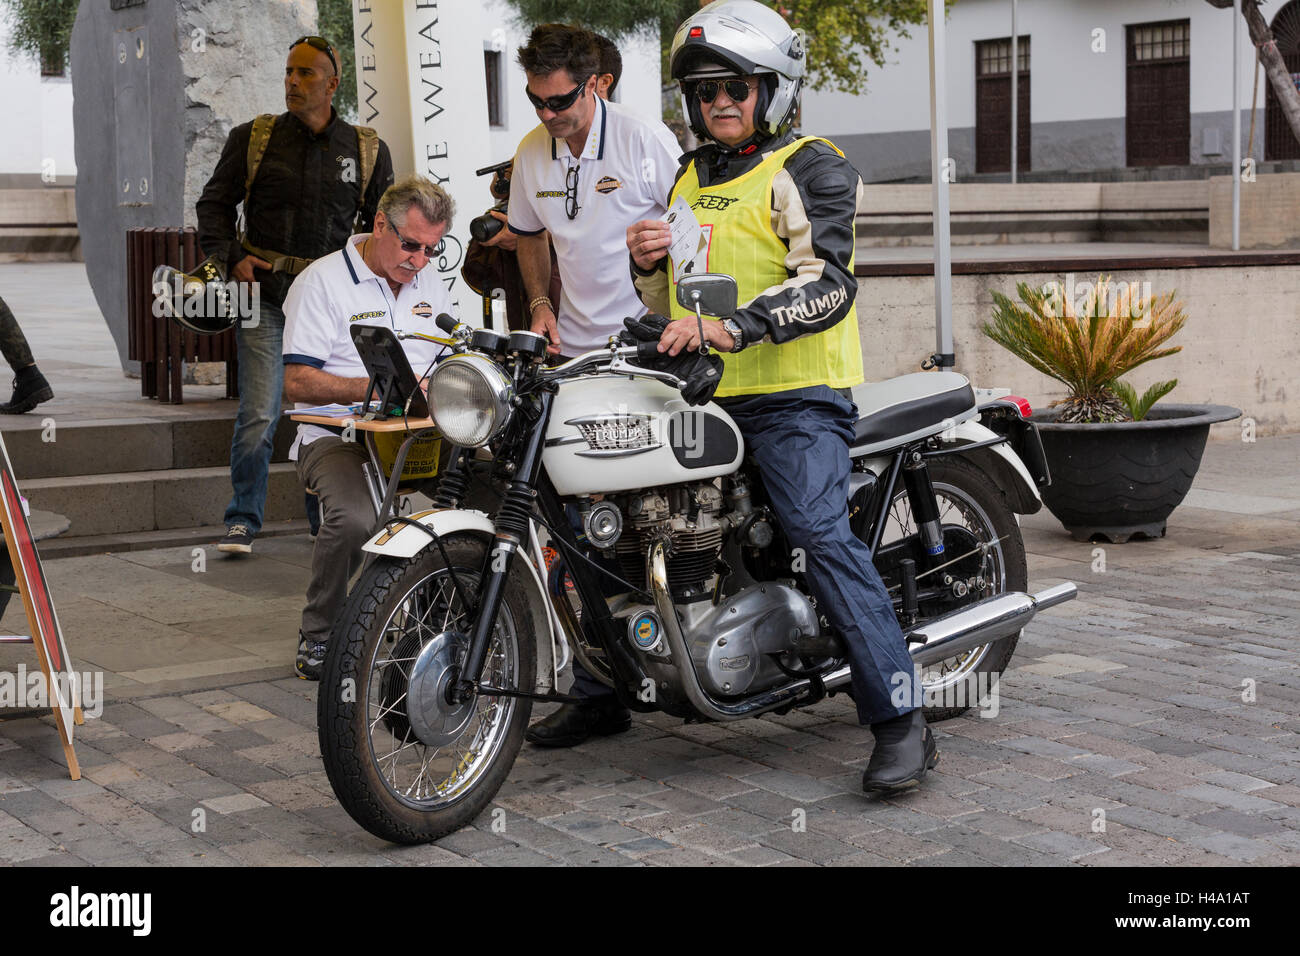 Santiago del Teide,  Tenerife, Canary Islands, Spain. 14th October 2016. Classic and modern motorcycles during the first days route from Santiago del Teide through Masca and return.  Queens Cavalcade event, during which 91 motorcycles will spend 4 days completing various routes throughout the Canary Islands. Credit:  Phil Crean A/Alamy Live News Stock Photo